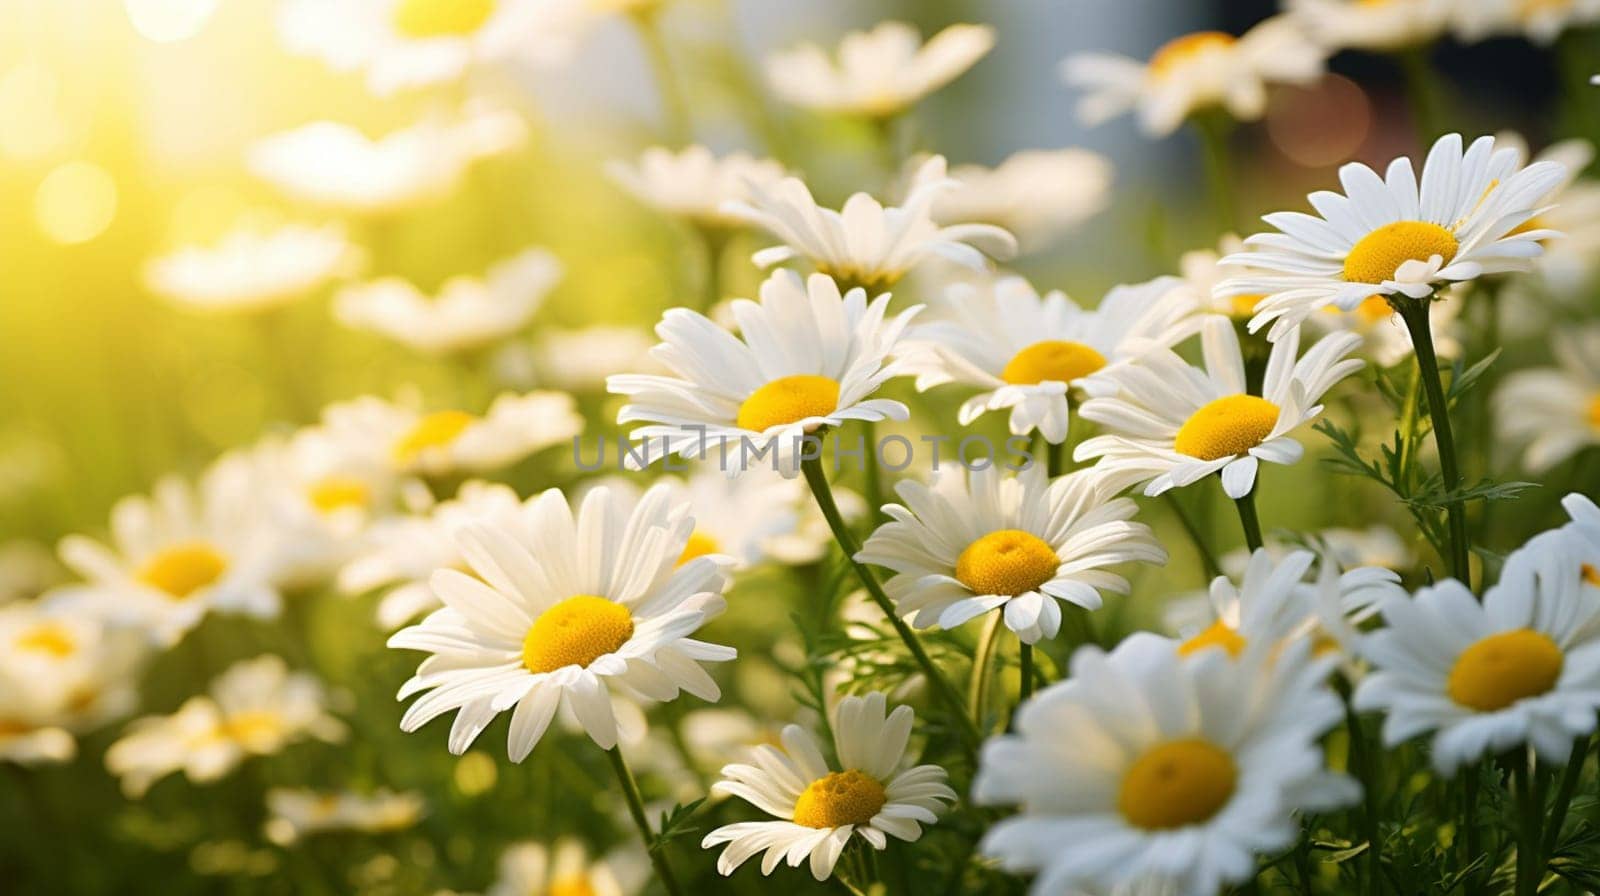 A field of Chamaemelum nobile flowers, also known as daisies, with the sun shining through them, creating a beautiful display of yellow and white petals against the lush green grass